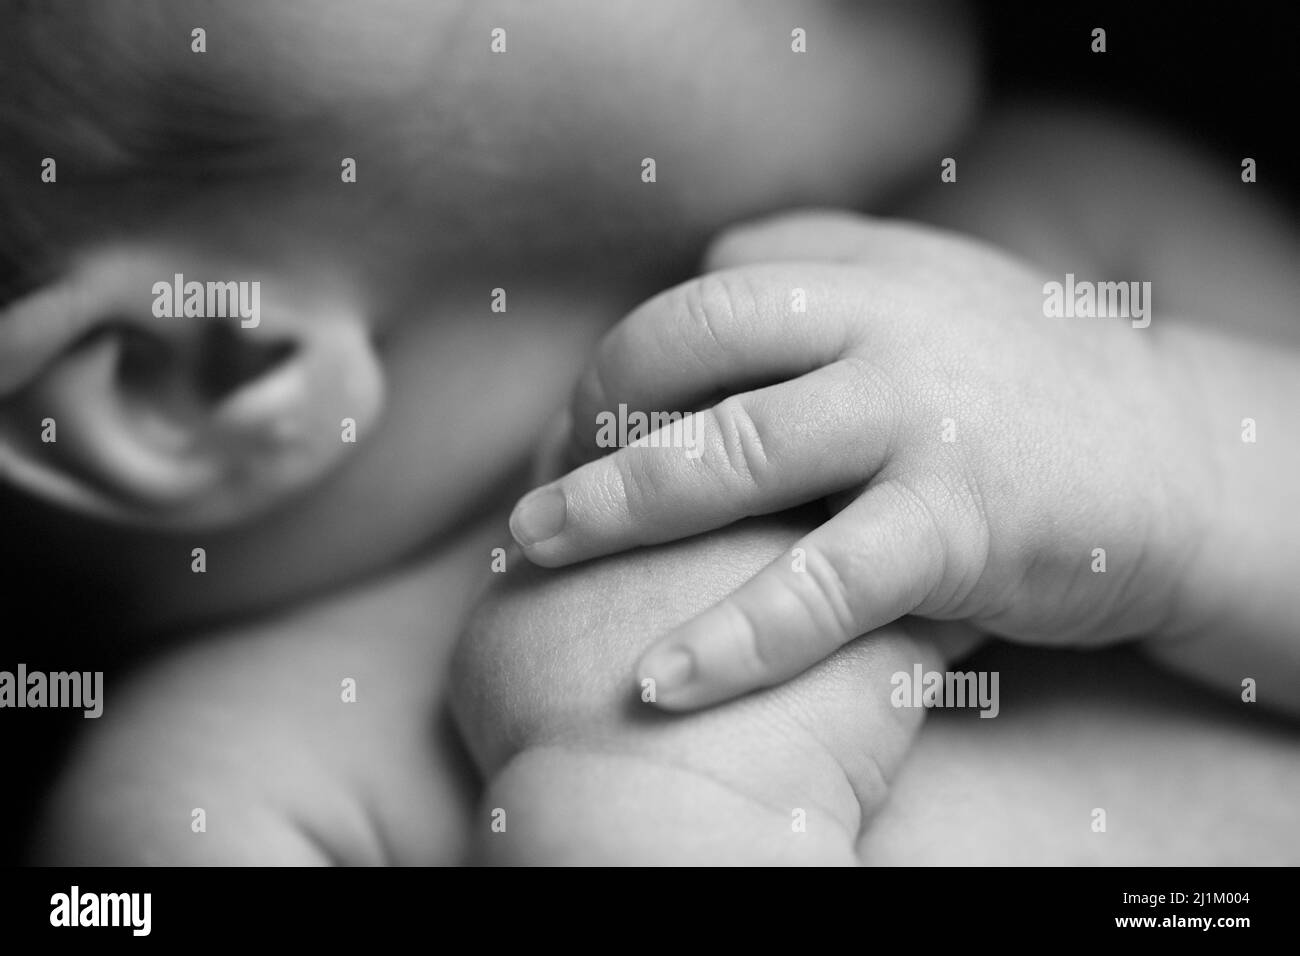 Close up Detail View of a Newborn Baby Stock Photo